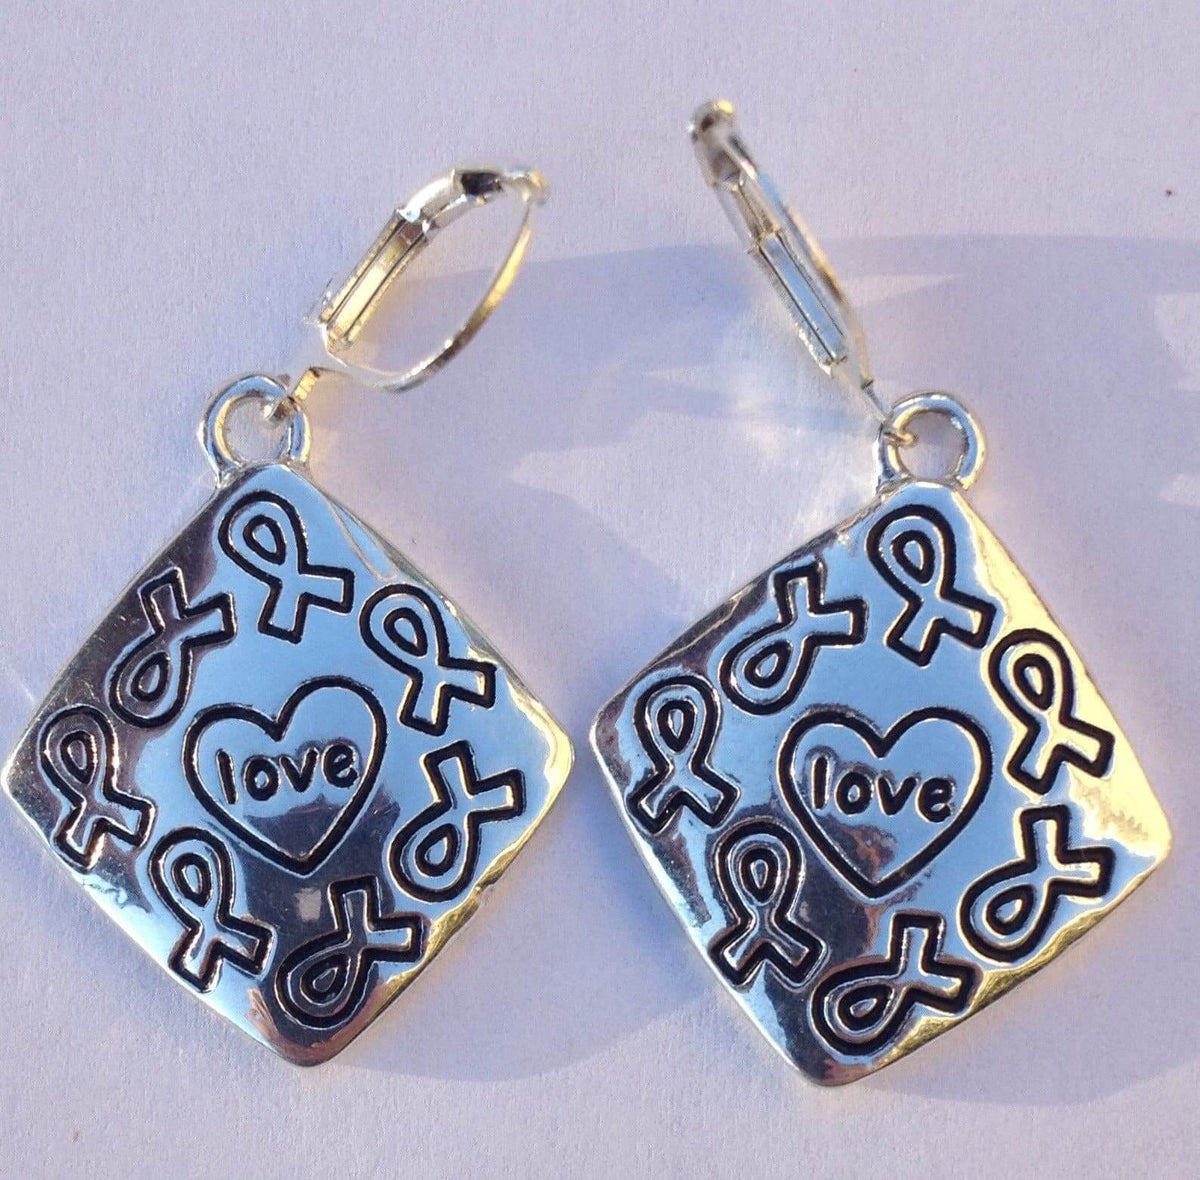 Love Ribbon Charm Earrings for Causes - The House of Awareness